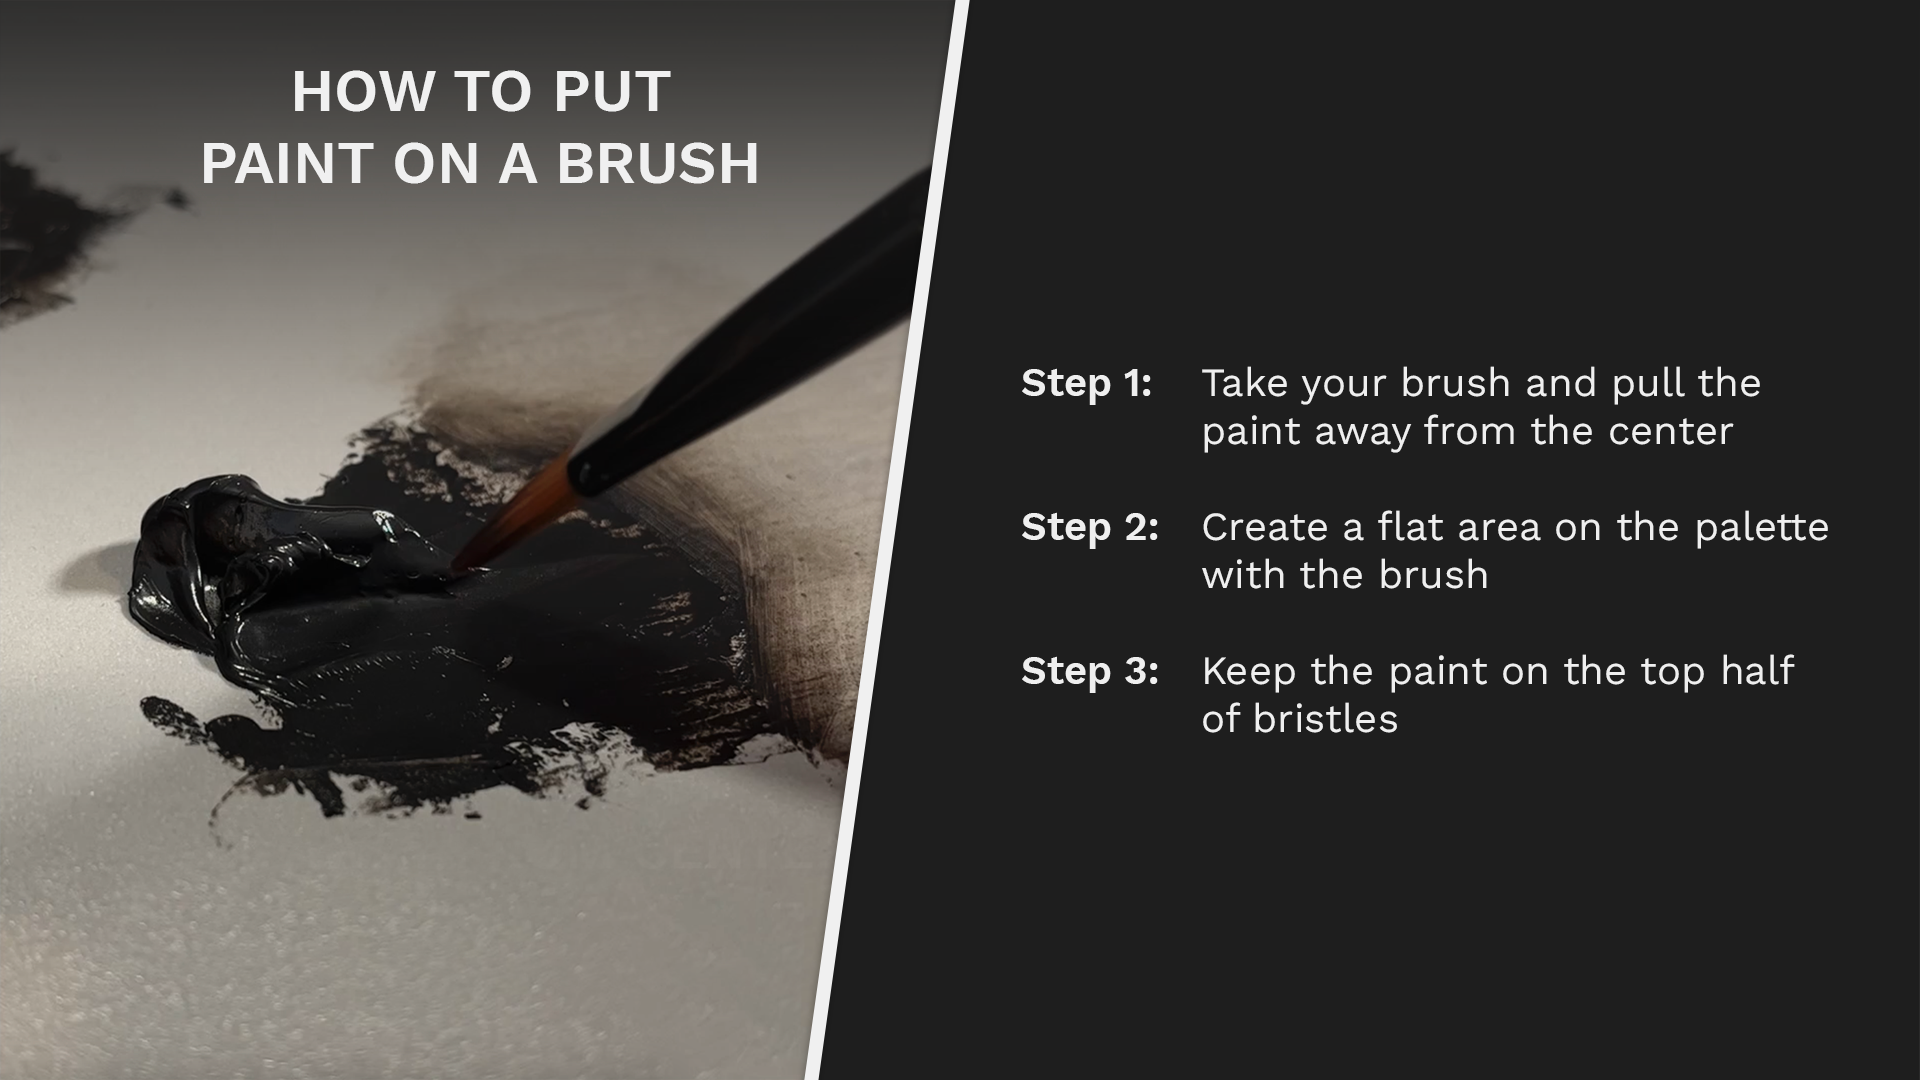 Even learning how to put paint on your brush is a skill to master when learning oil painting for beginners.